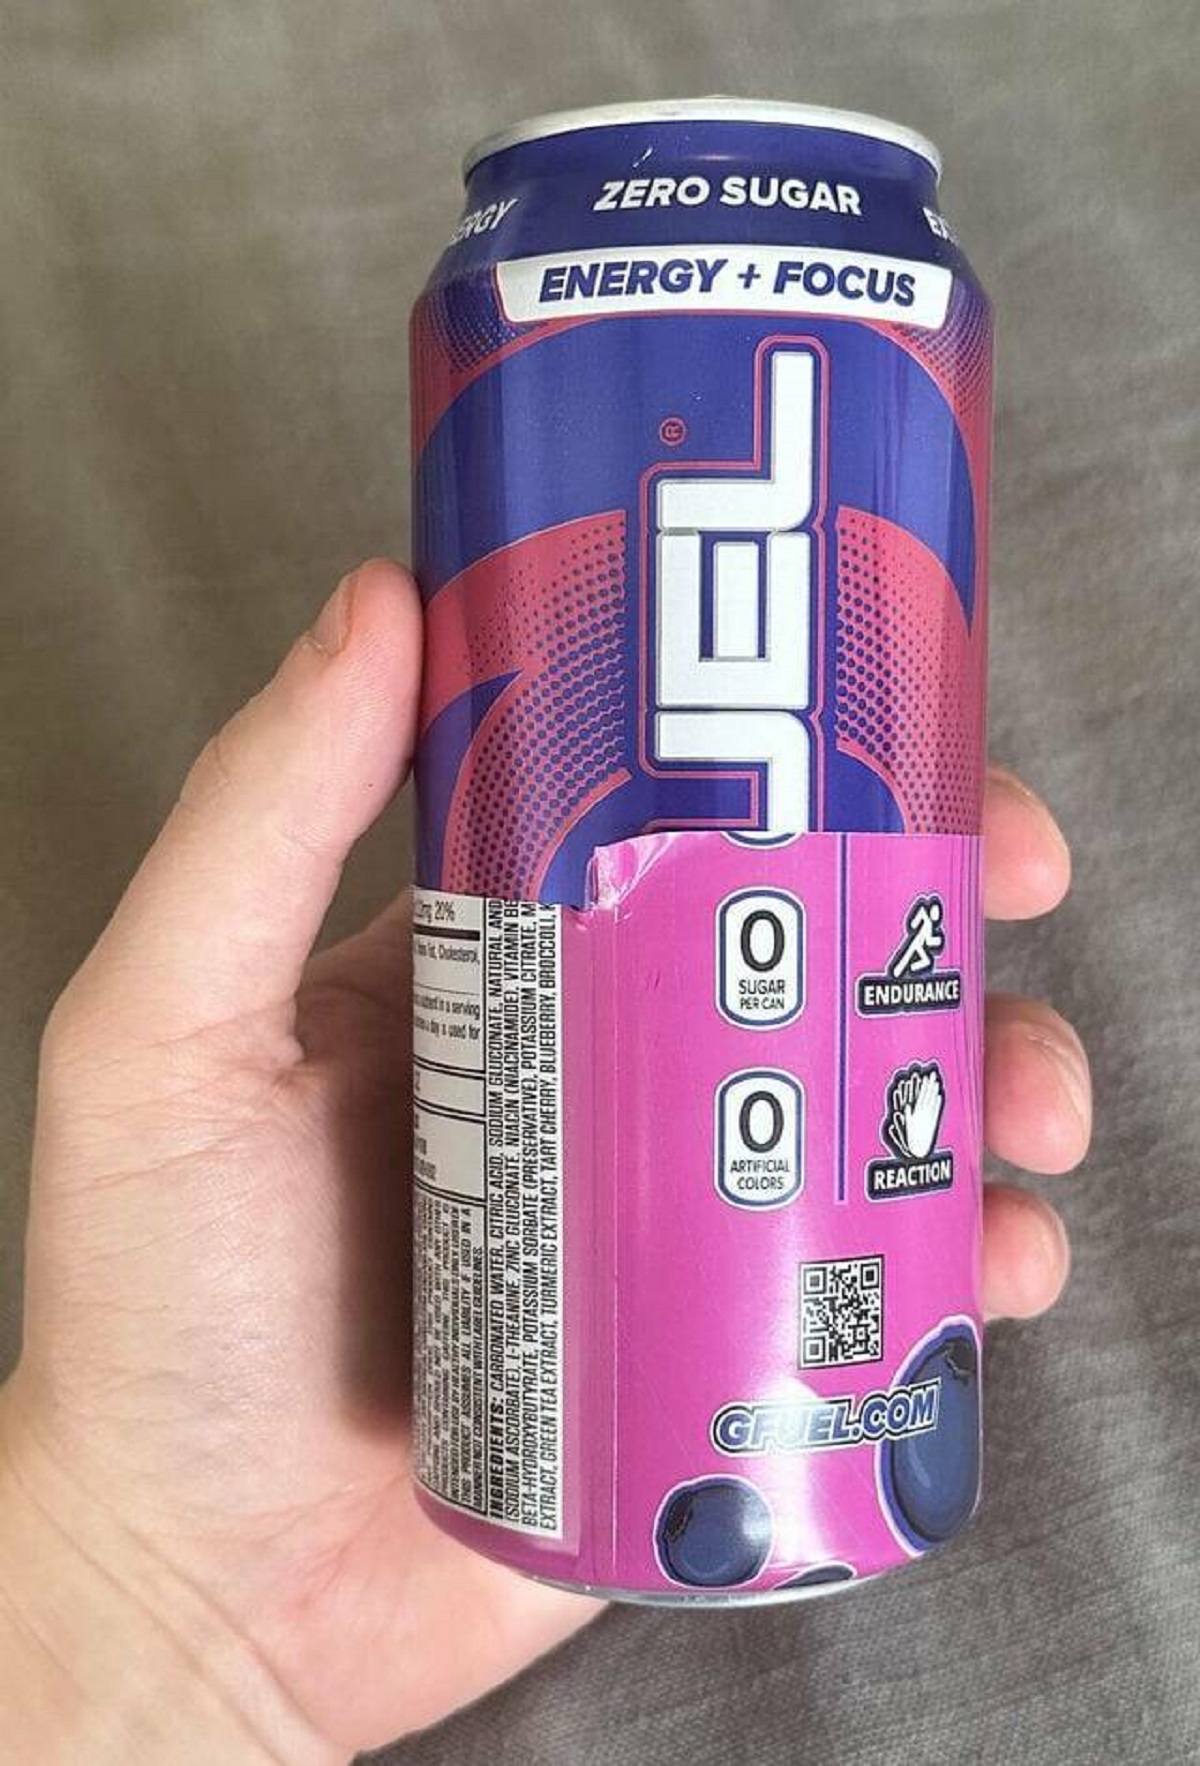 "This Energy Drink has a wrapper around the can, but removing the wrapper shows a can with normal print & a different flavor"